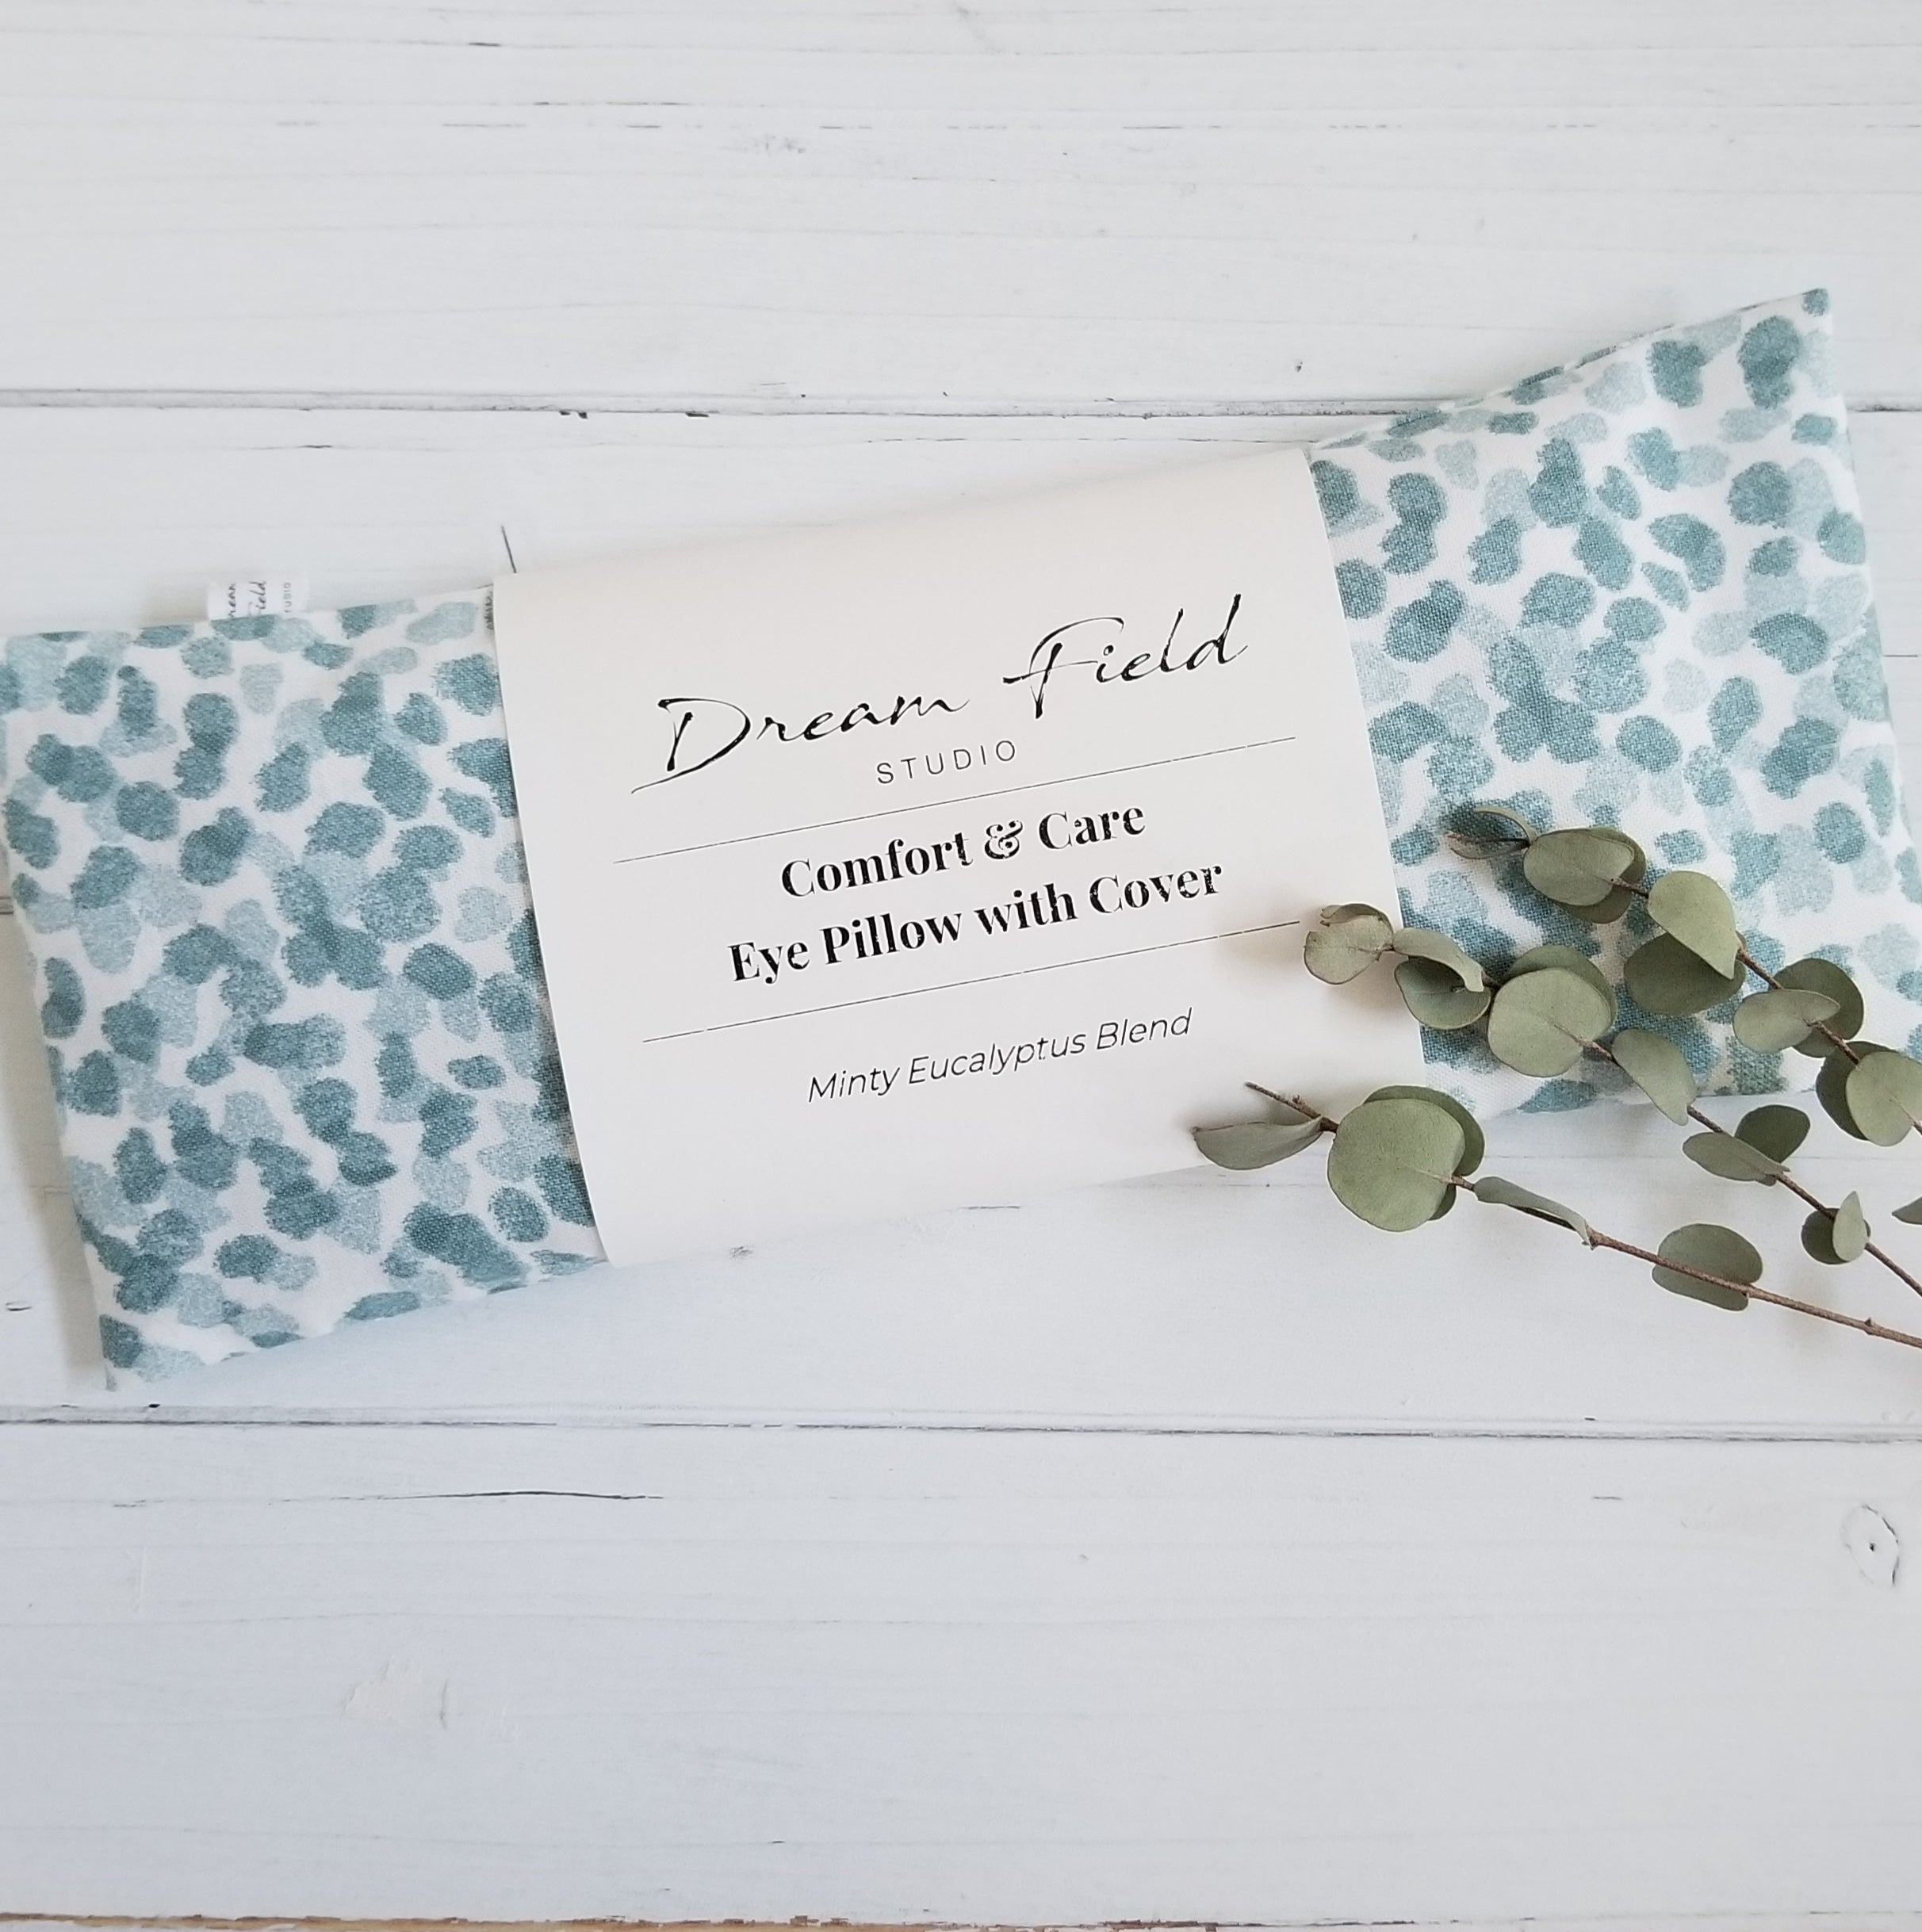 Minty eucalyptus blend eye pillow in blue spa dot print and sprig of eucalyptus leaves by Dream Field Studio